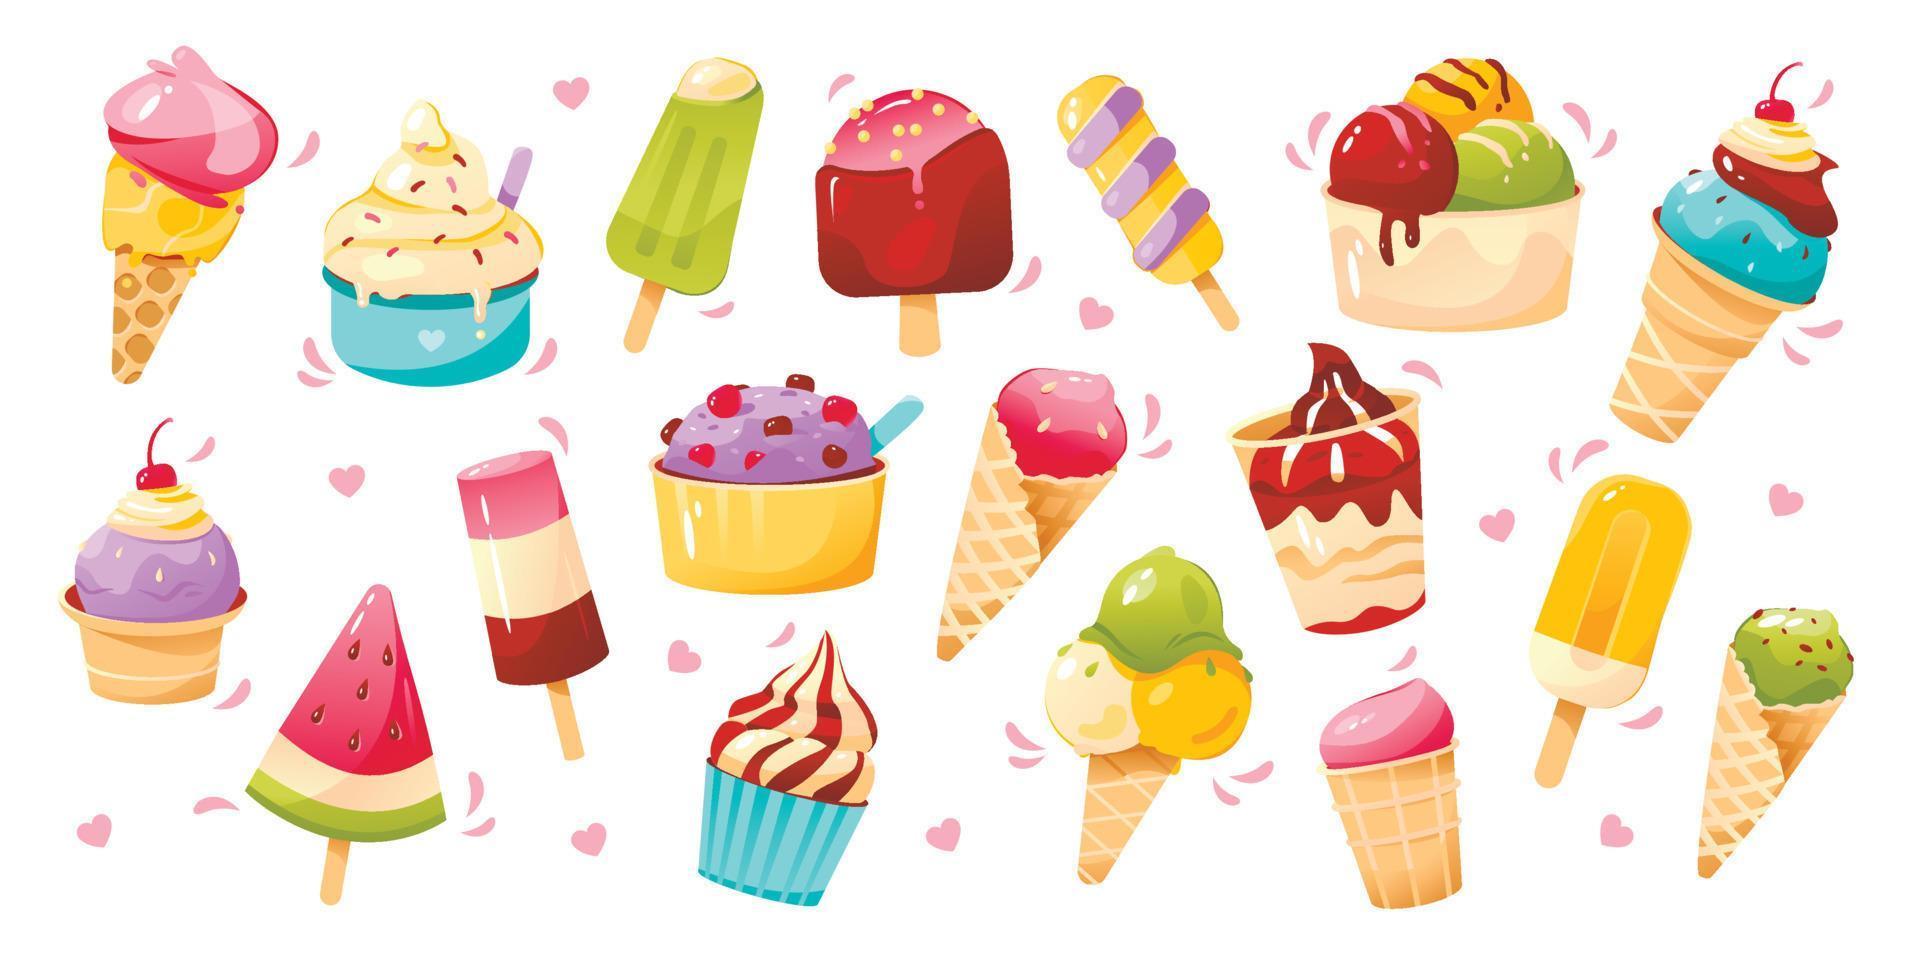 Ice cream is a large set. Vector icons of different types of ice cream. Bright summer poster with sweet food. A collection of scrapbooking elements for a summer party.